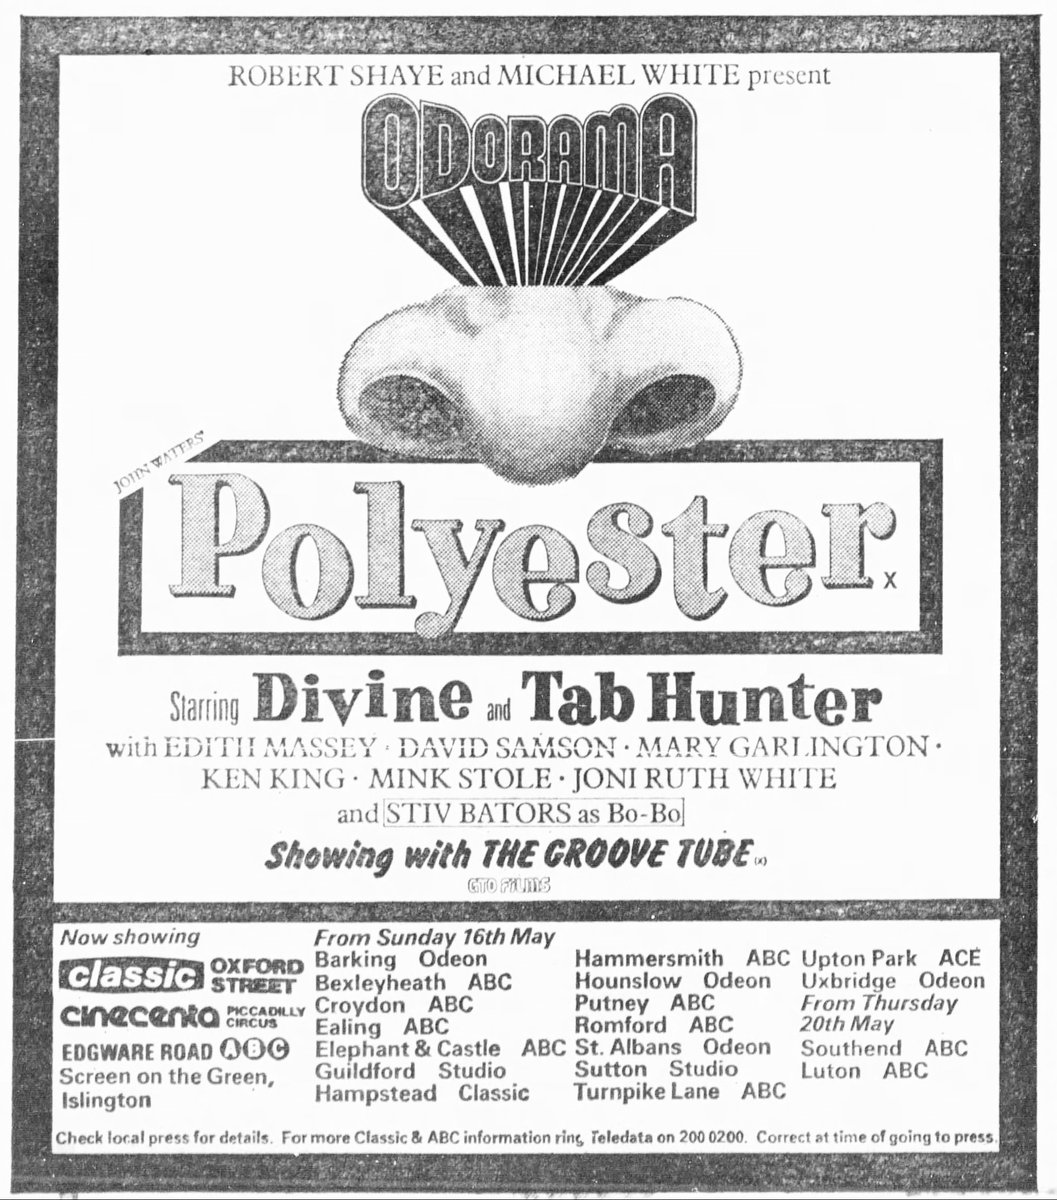 On this day, May 13th, 1982, John Waters' POLYESTER, starring Divine opened in London in 'Odorama', in which the audience were presented with 'scratch 'n sniff' cards to use at identified moments during the film..